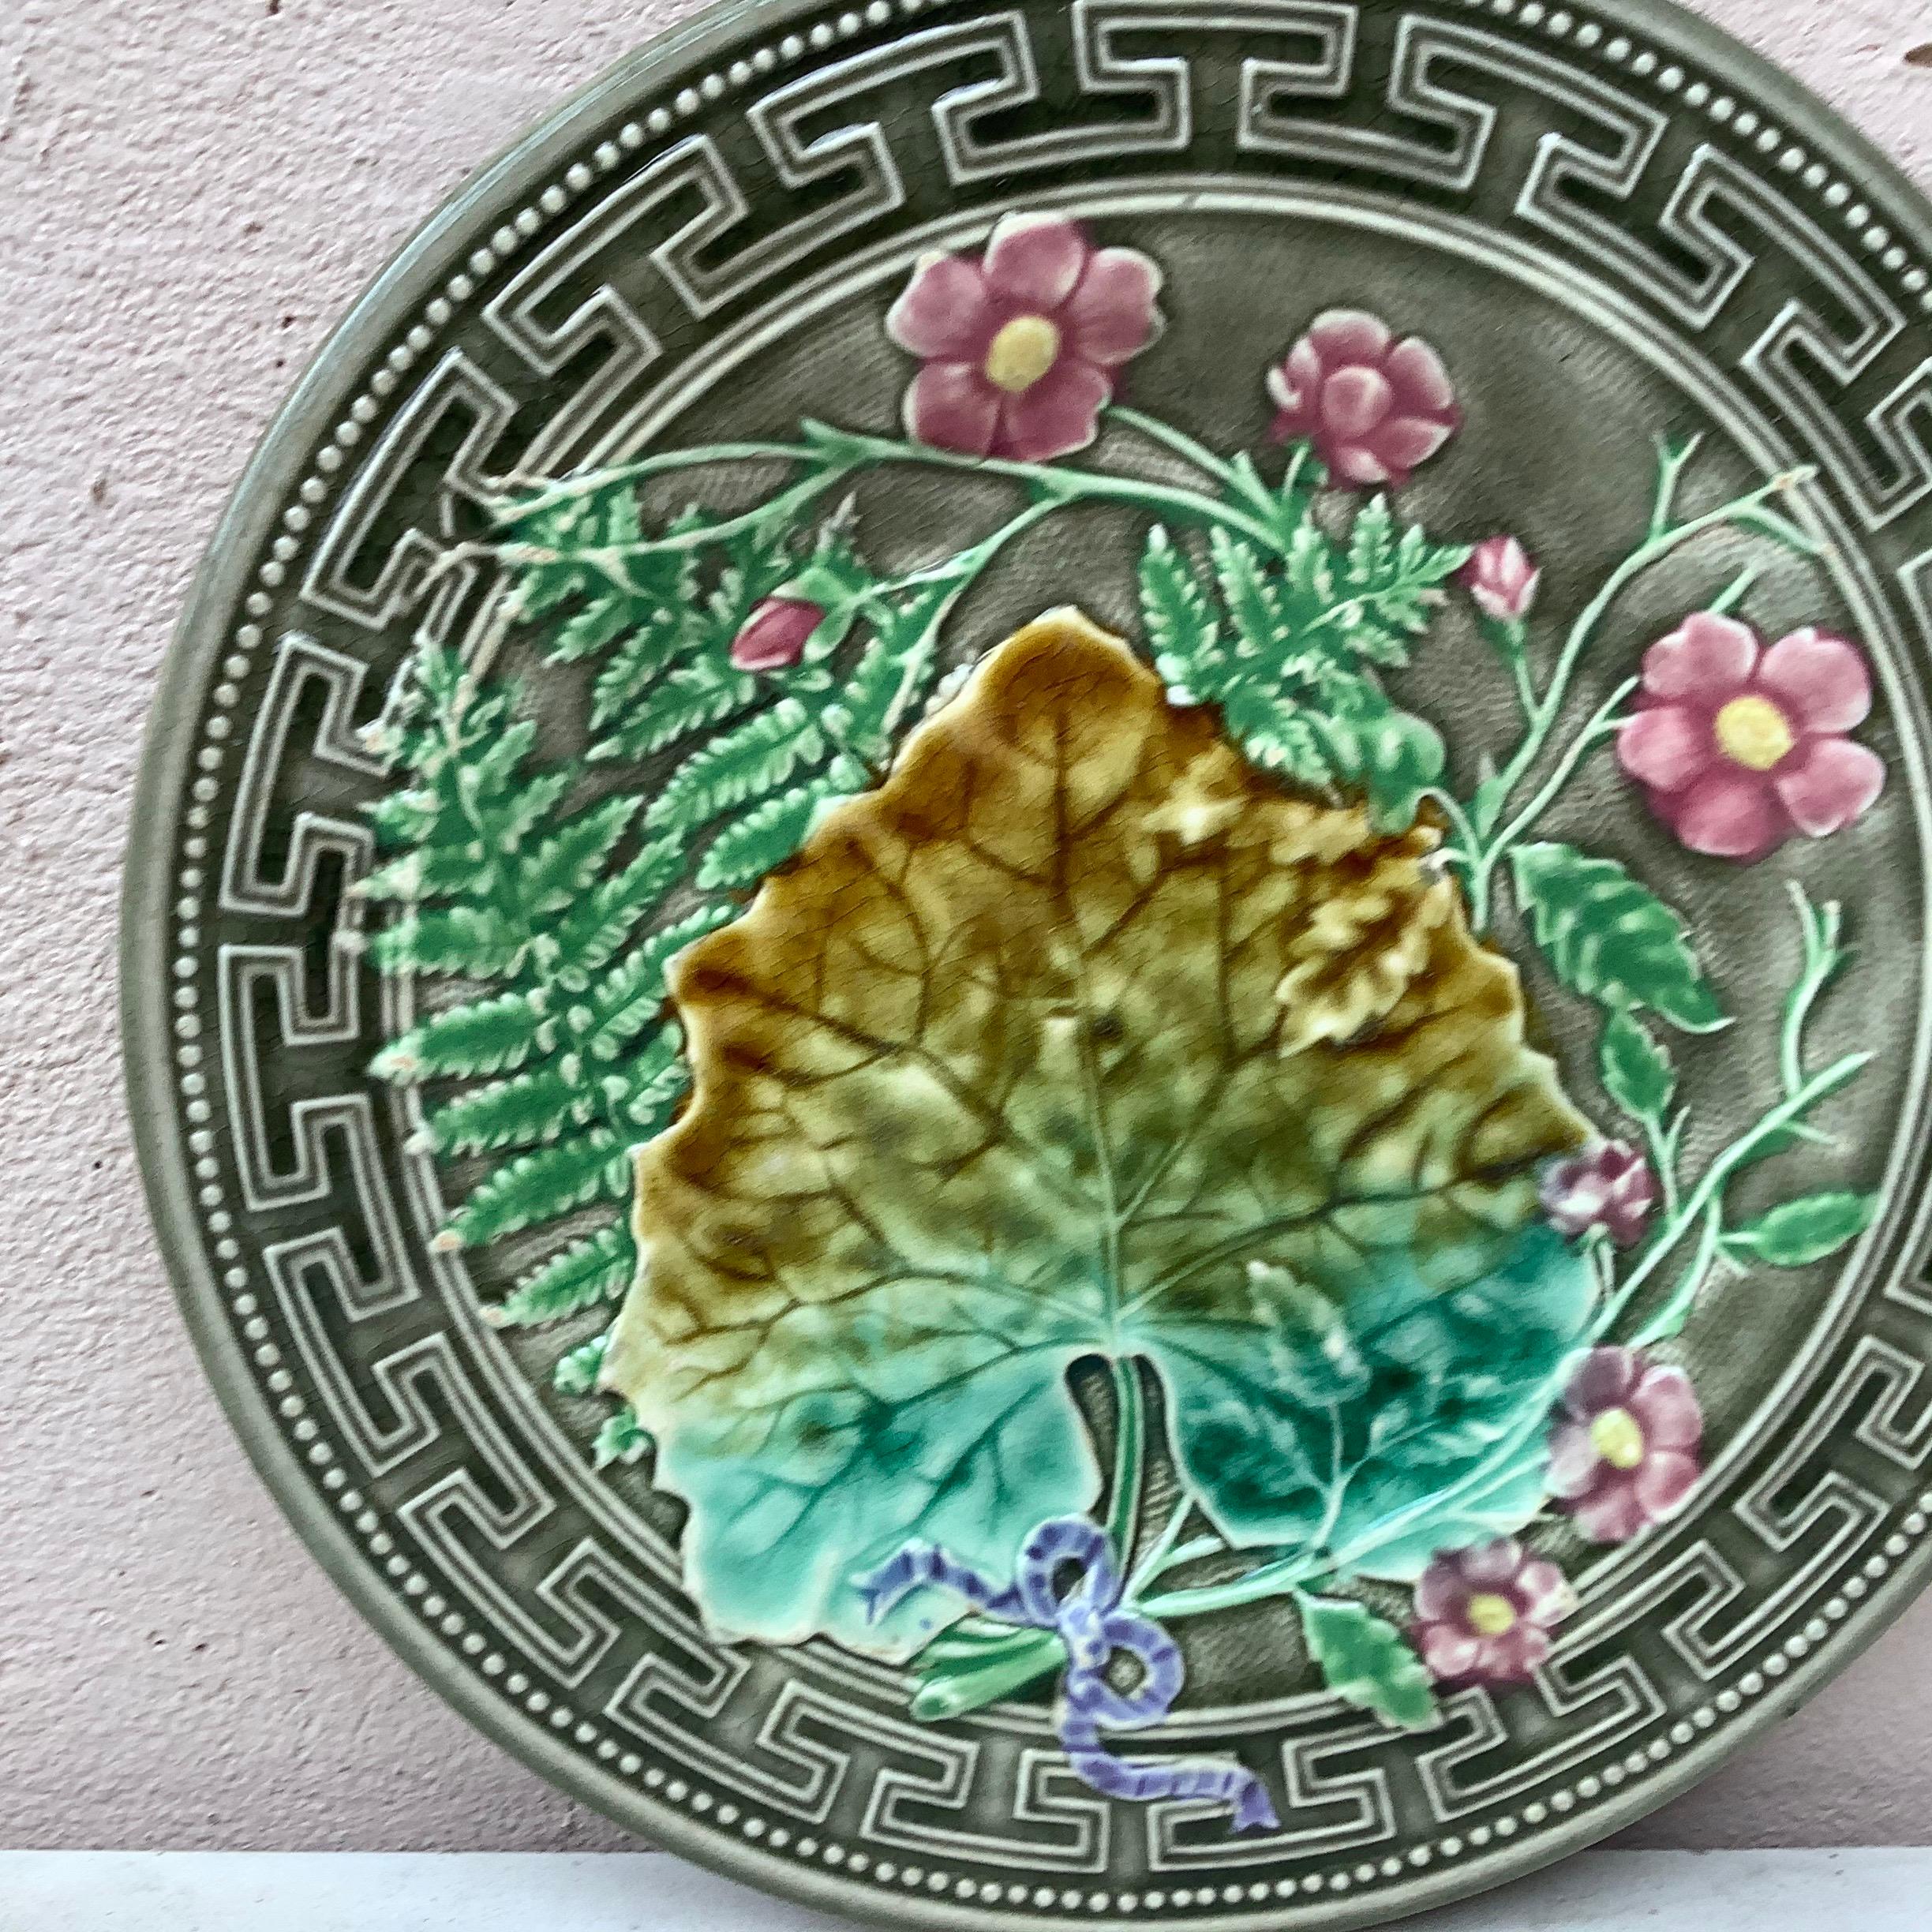 Majolica plate signed Choisy le roi, circa 1890.
Decorated with leaves, ferns, pink flowers and Greek border.